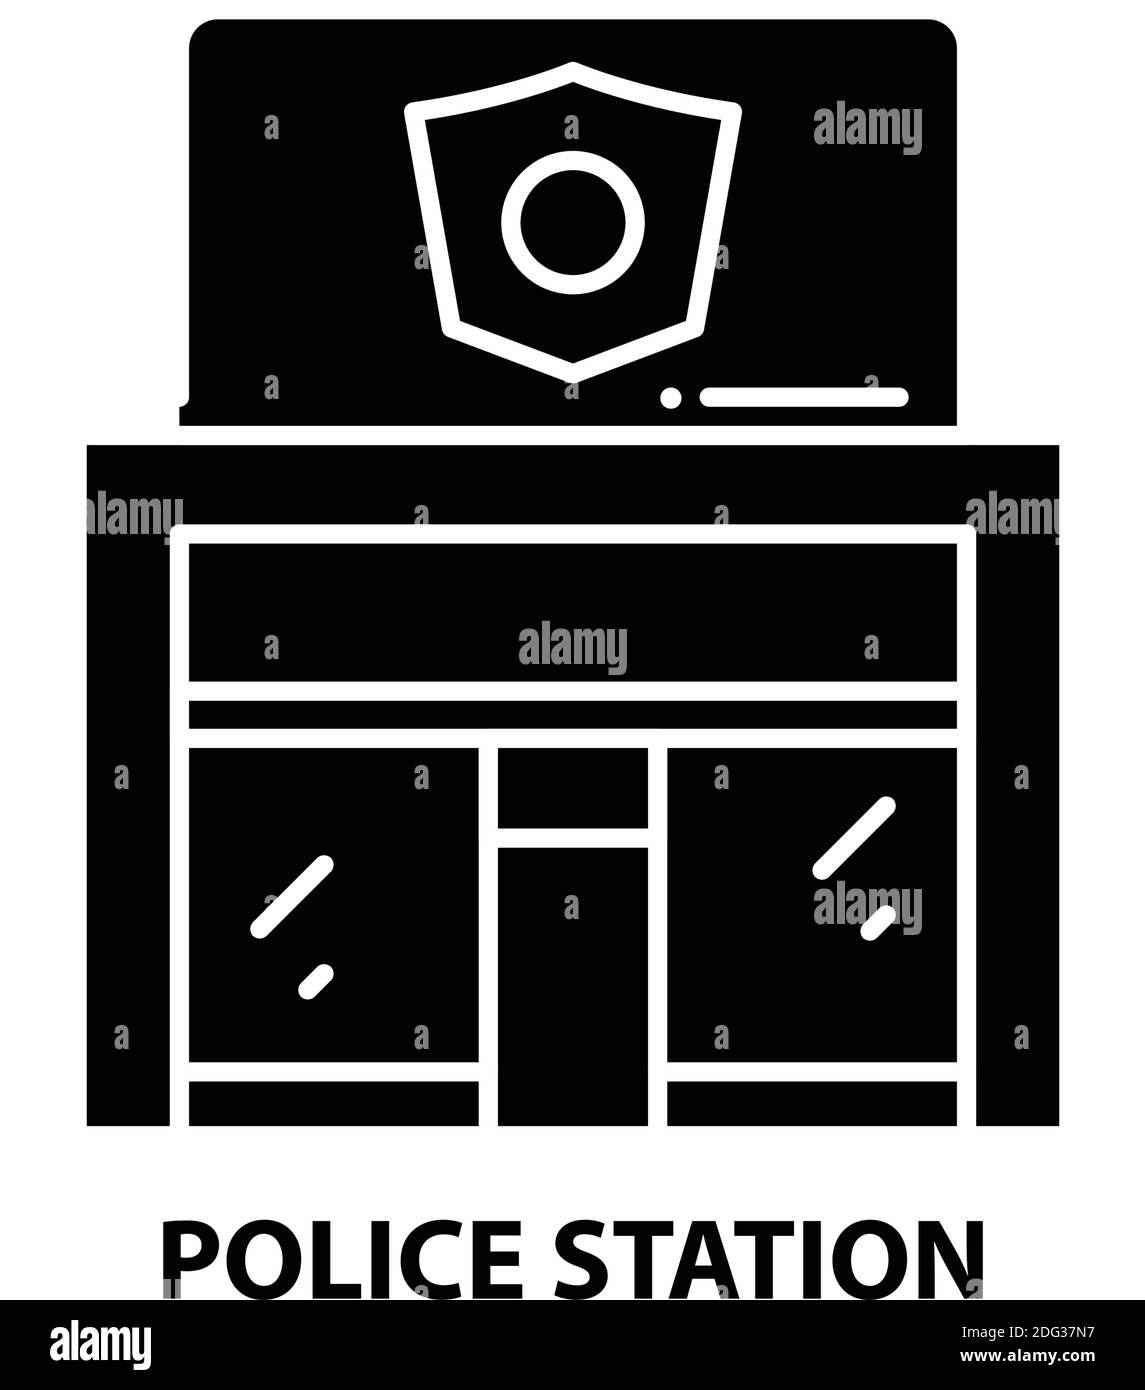 police station icon, black vector sign with editable strokes, concept illustration Stock Vector